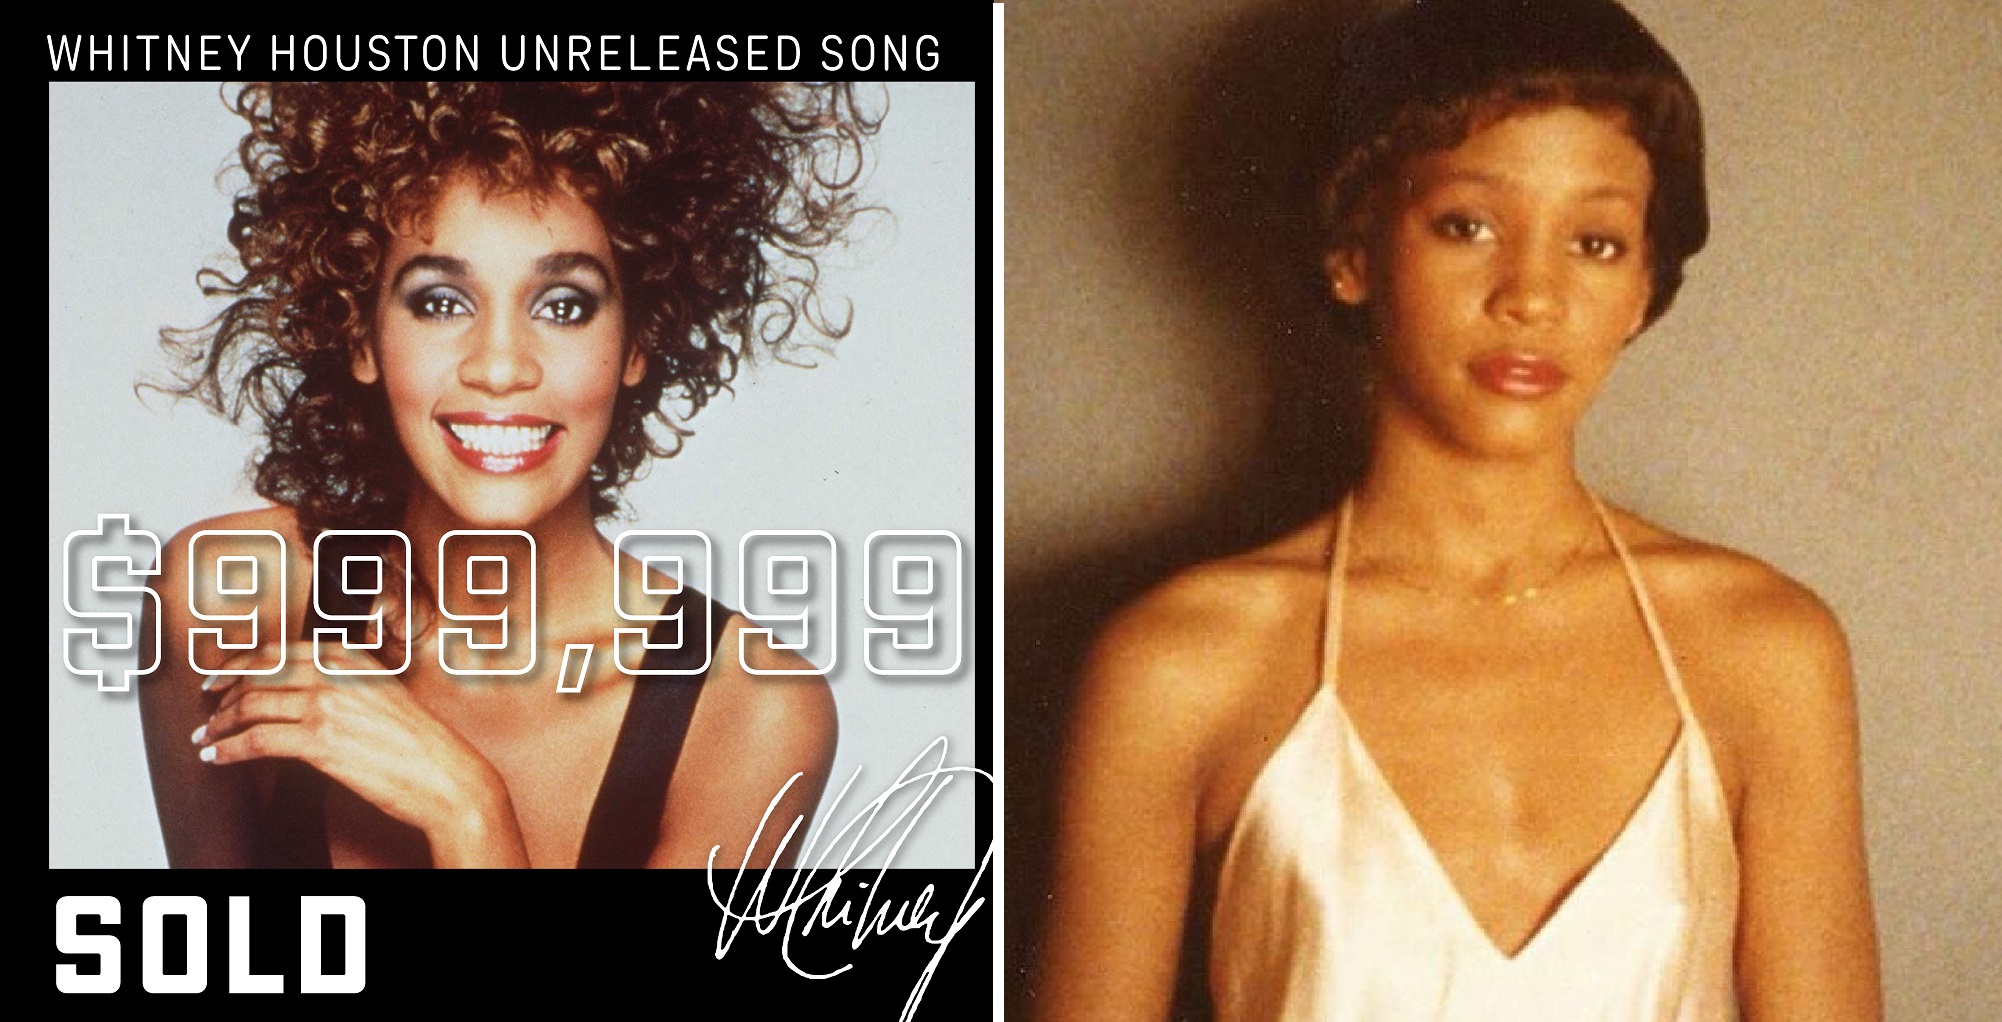 Unreleased Whitney Houston Song Sold For $999,999 Through NFT Platform OneOf In Auction